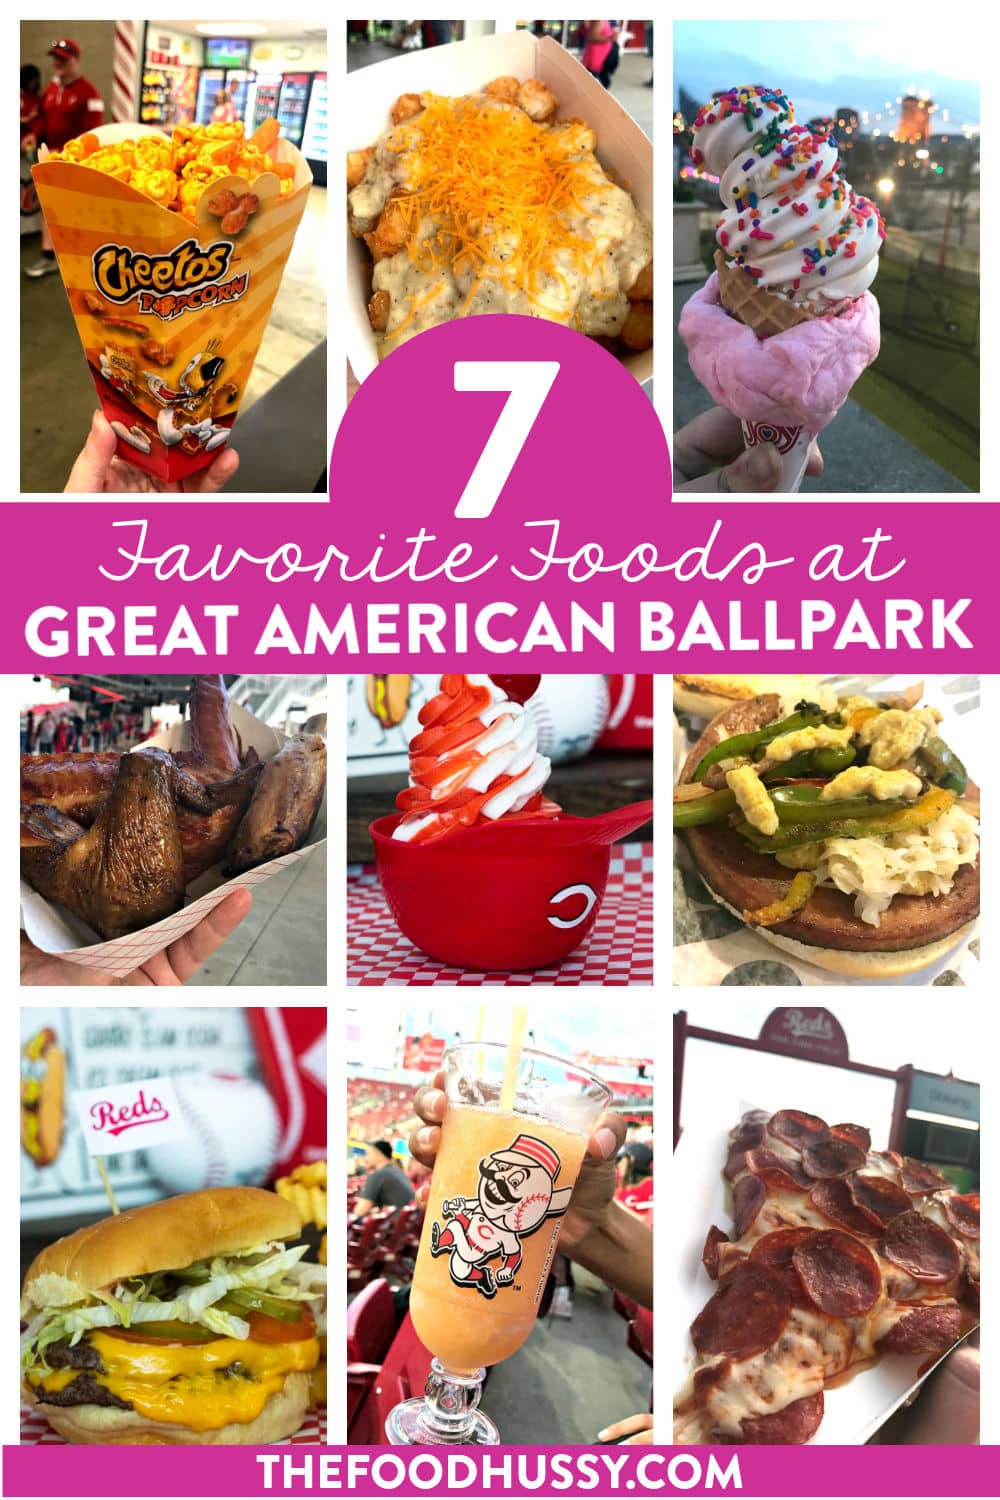 Great American Ballpark Food choices are delicious! You can pretty much find anything you want! GABP is mainly known for our Cincinnati Reds - America's first baseball team - but trust me - from Opening Day to the Playoffs - the food at the ballpark is just as good as the baseball!  via @foodhussy